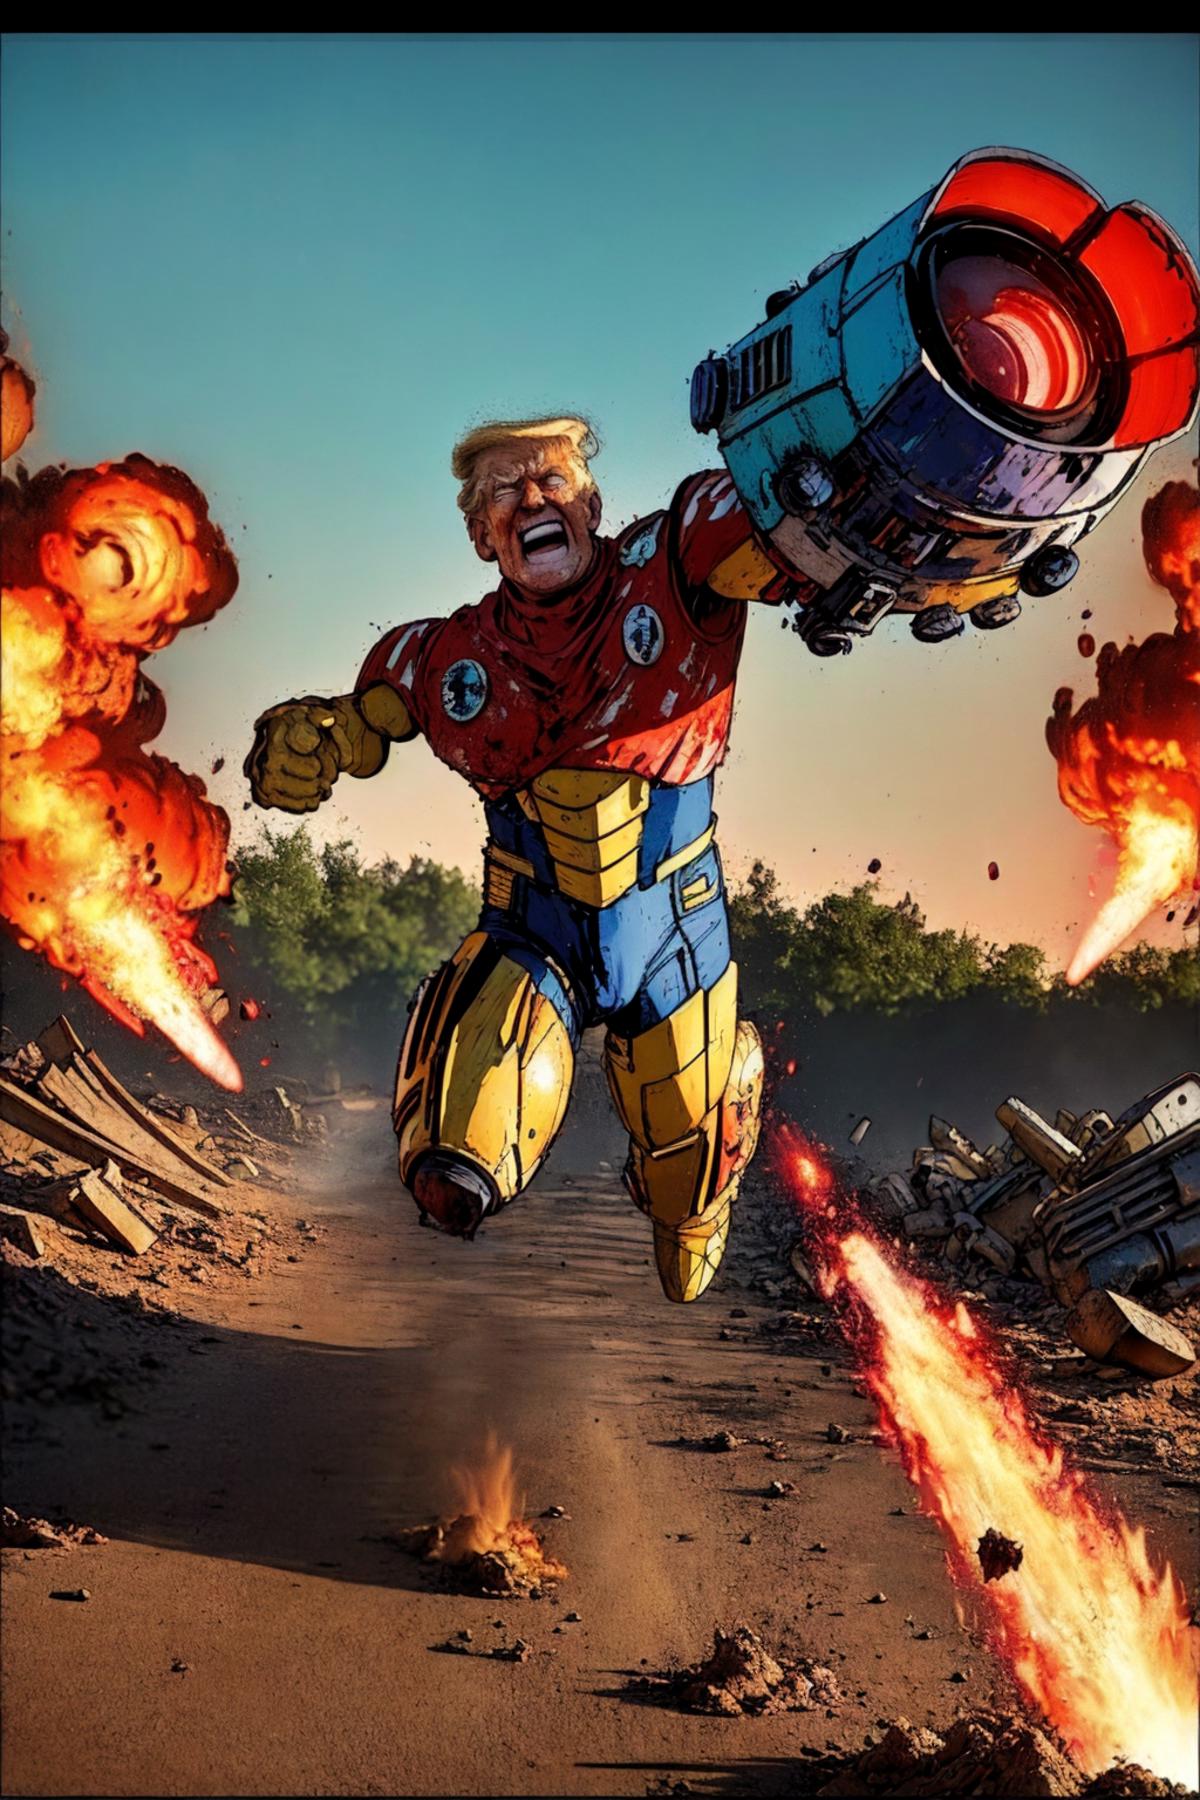 Donald Trump image by superskirv